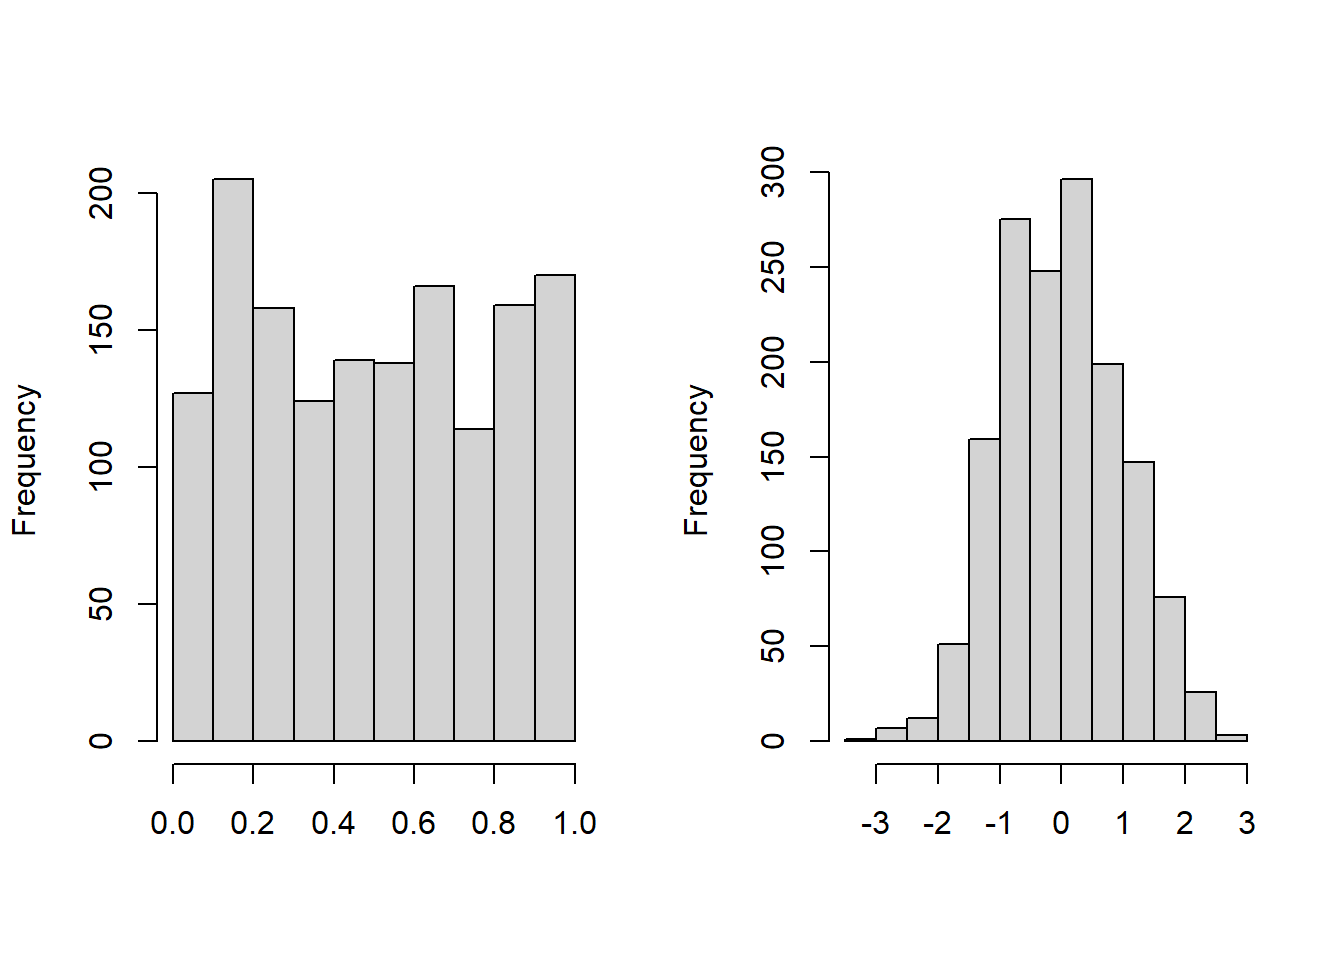 Histogram of Transformed Loss. The left-hand panel shows the distribution of probability integral transformed losses. The right-hand panel shows the distribution for the corresponding normal scores.